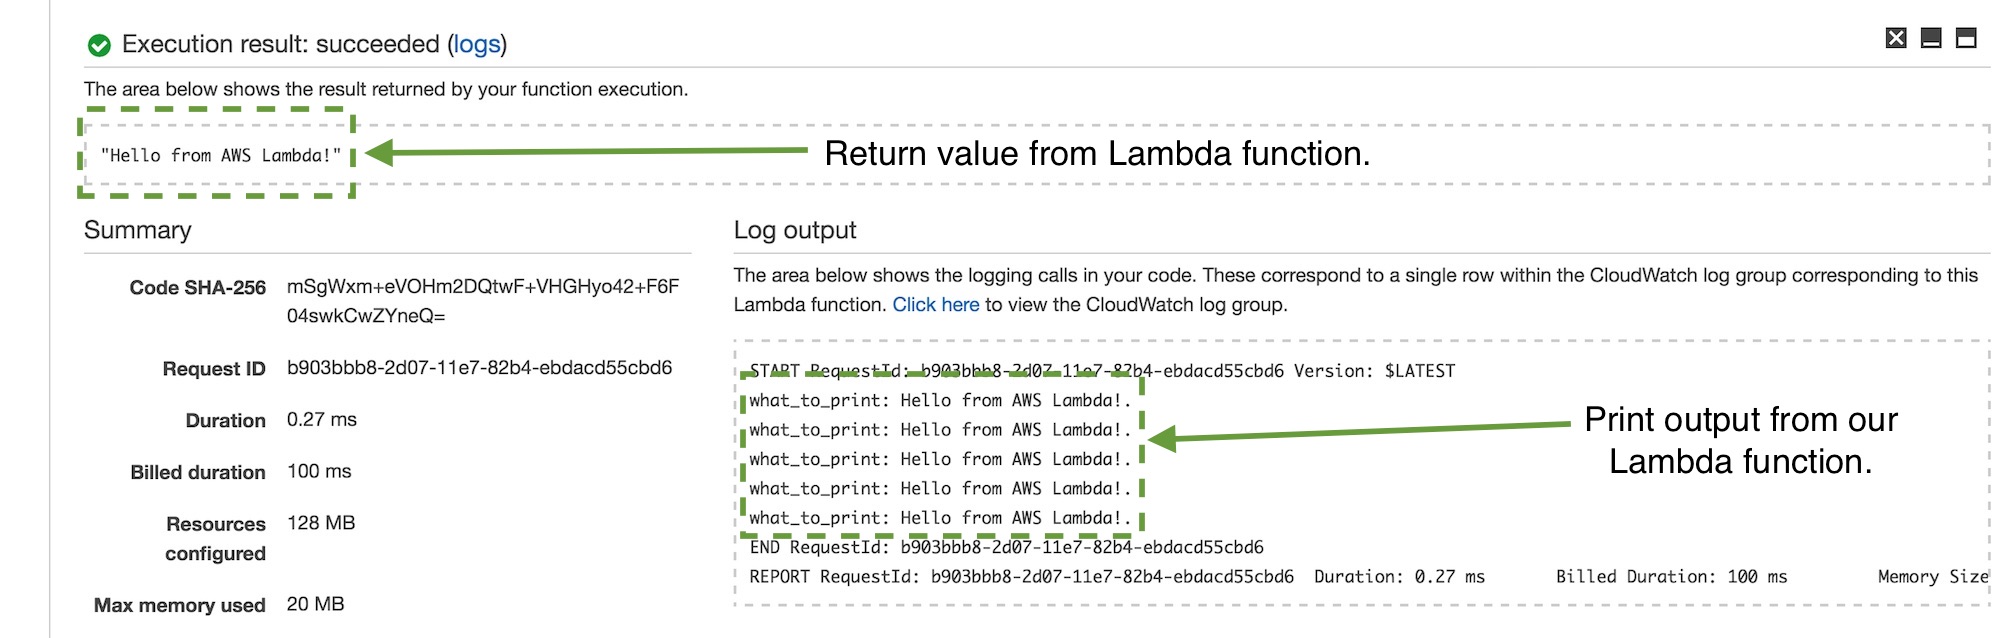 Results from executing our new Lambda function.